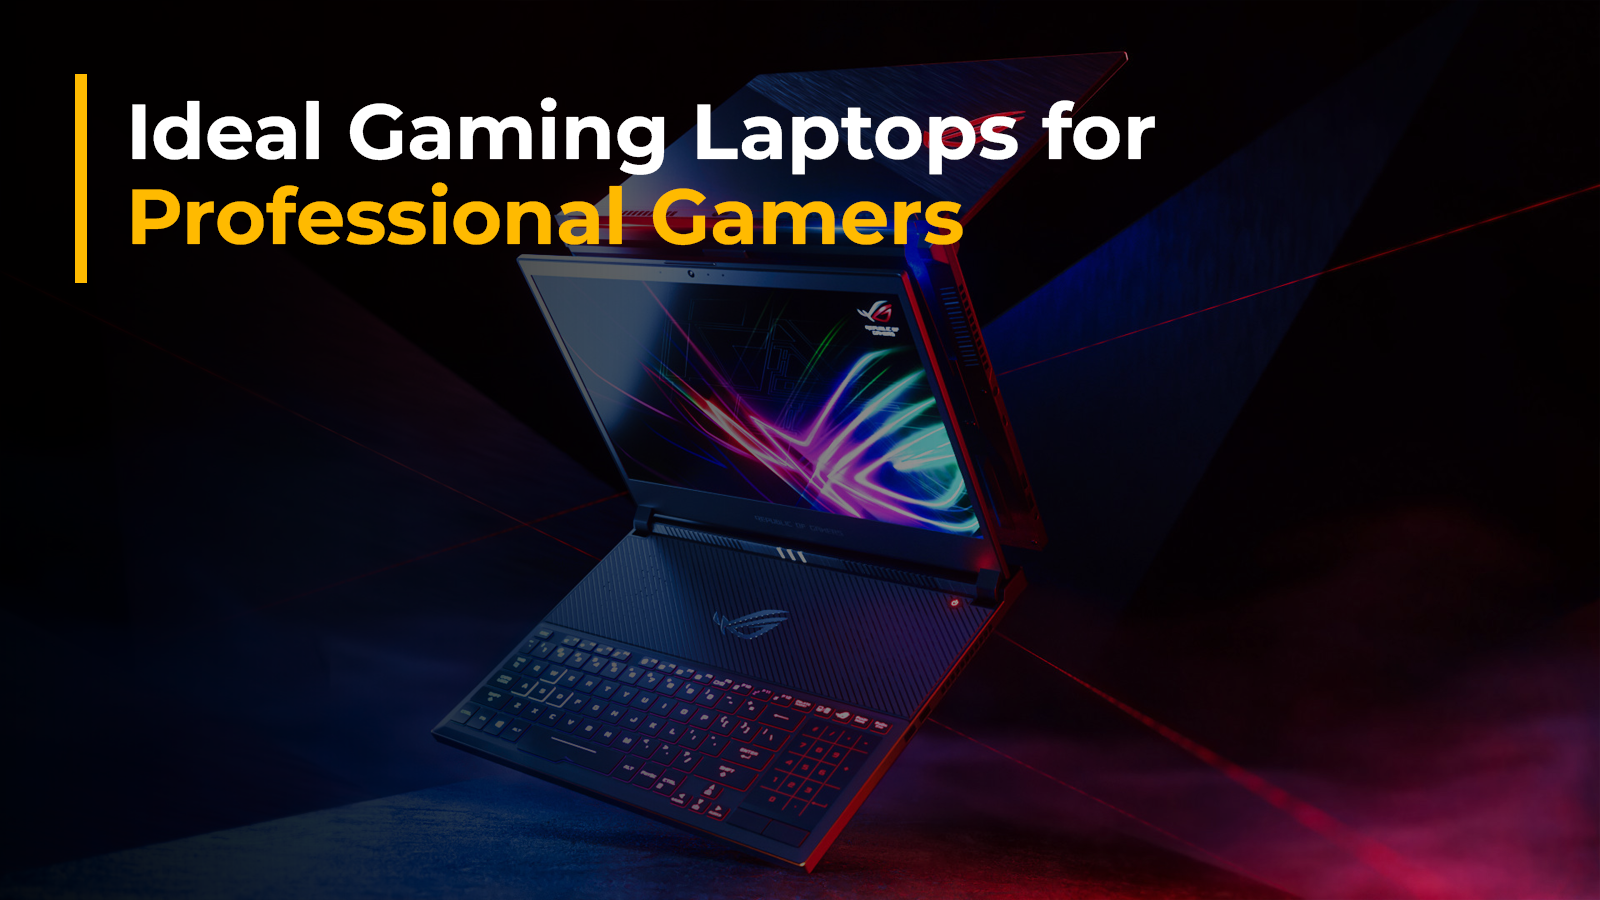 Best Gaming Laptops forProfessional Gamers: Under Low Cost